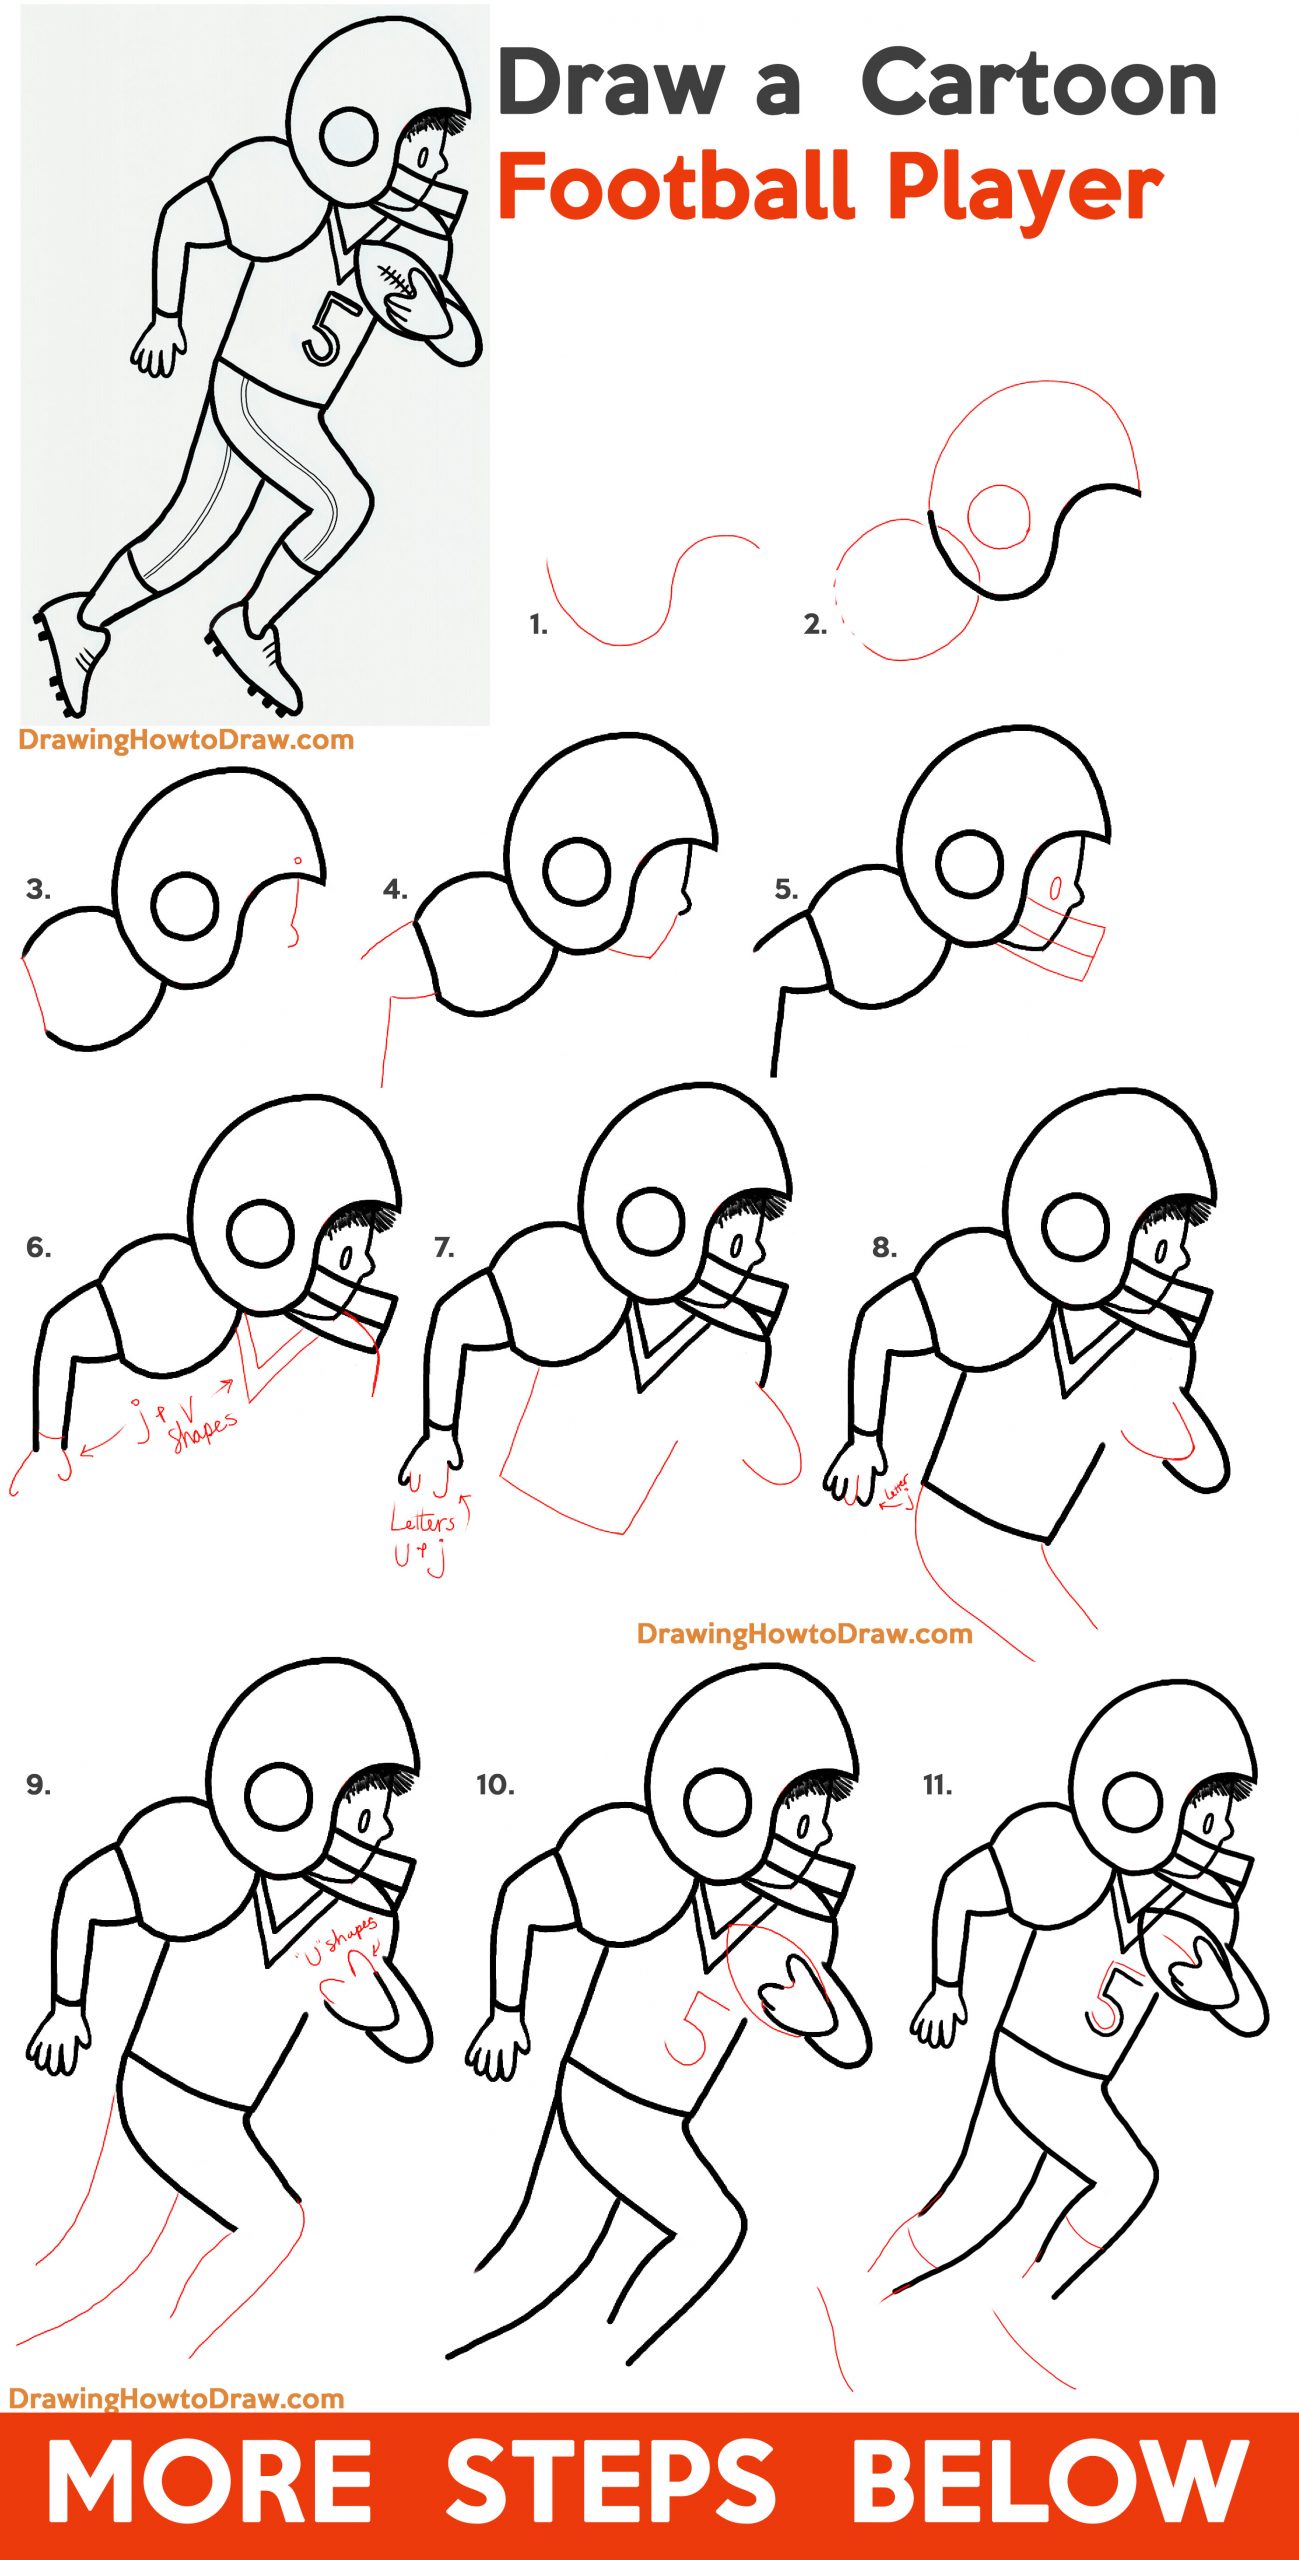 Learn How to Draw a Cartoon American Football Receiver - Easy Step by Step Drawing Tutorial